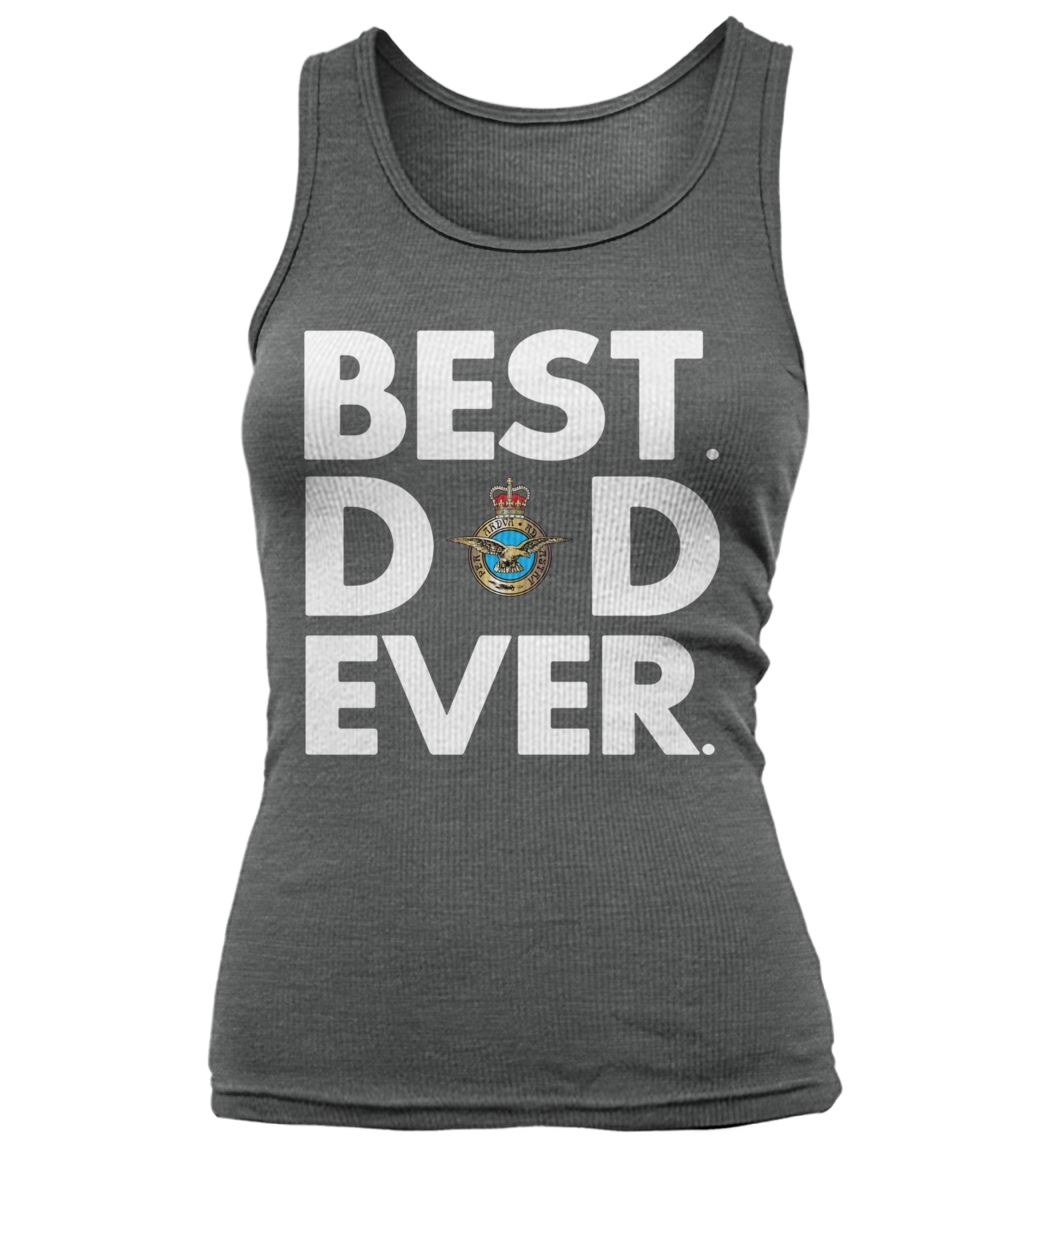 Royal air force best dad ever women's tank top